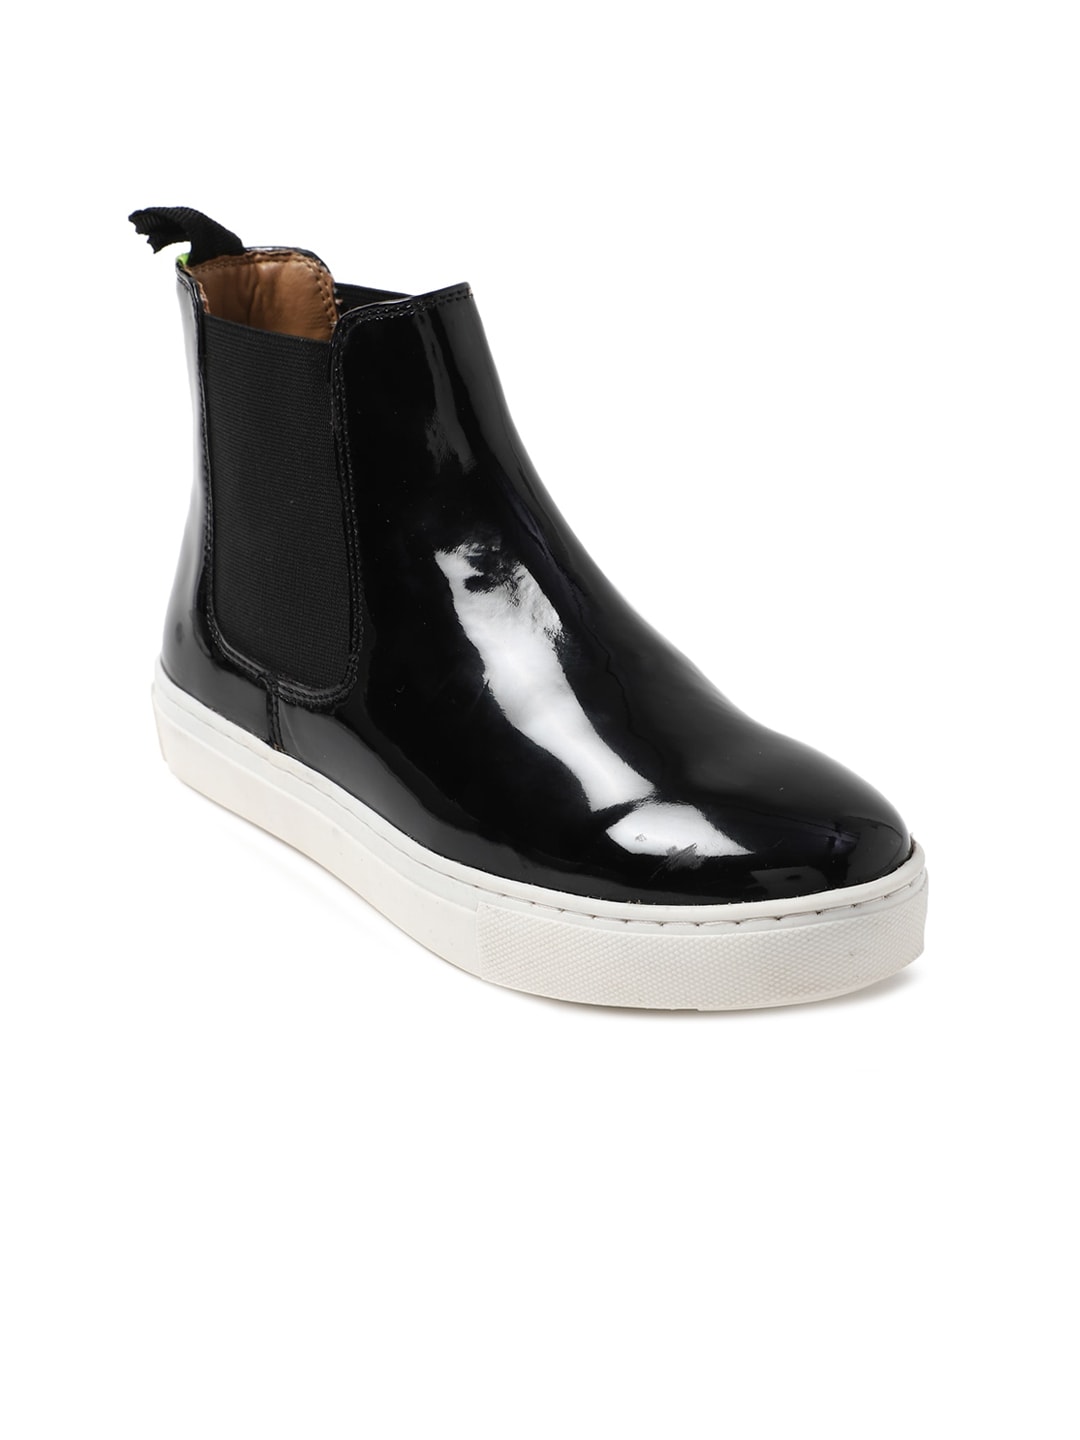 FOREVER 21 Women Black Solid Mid-Top PU Flat Boots Price in India